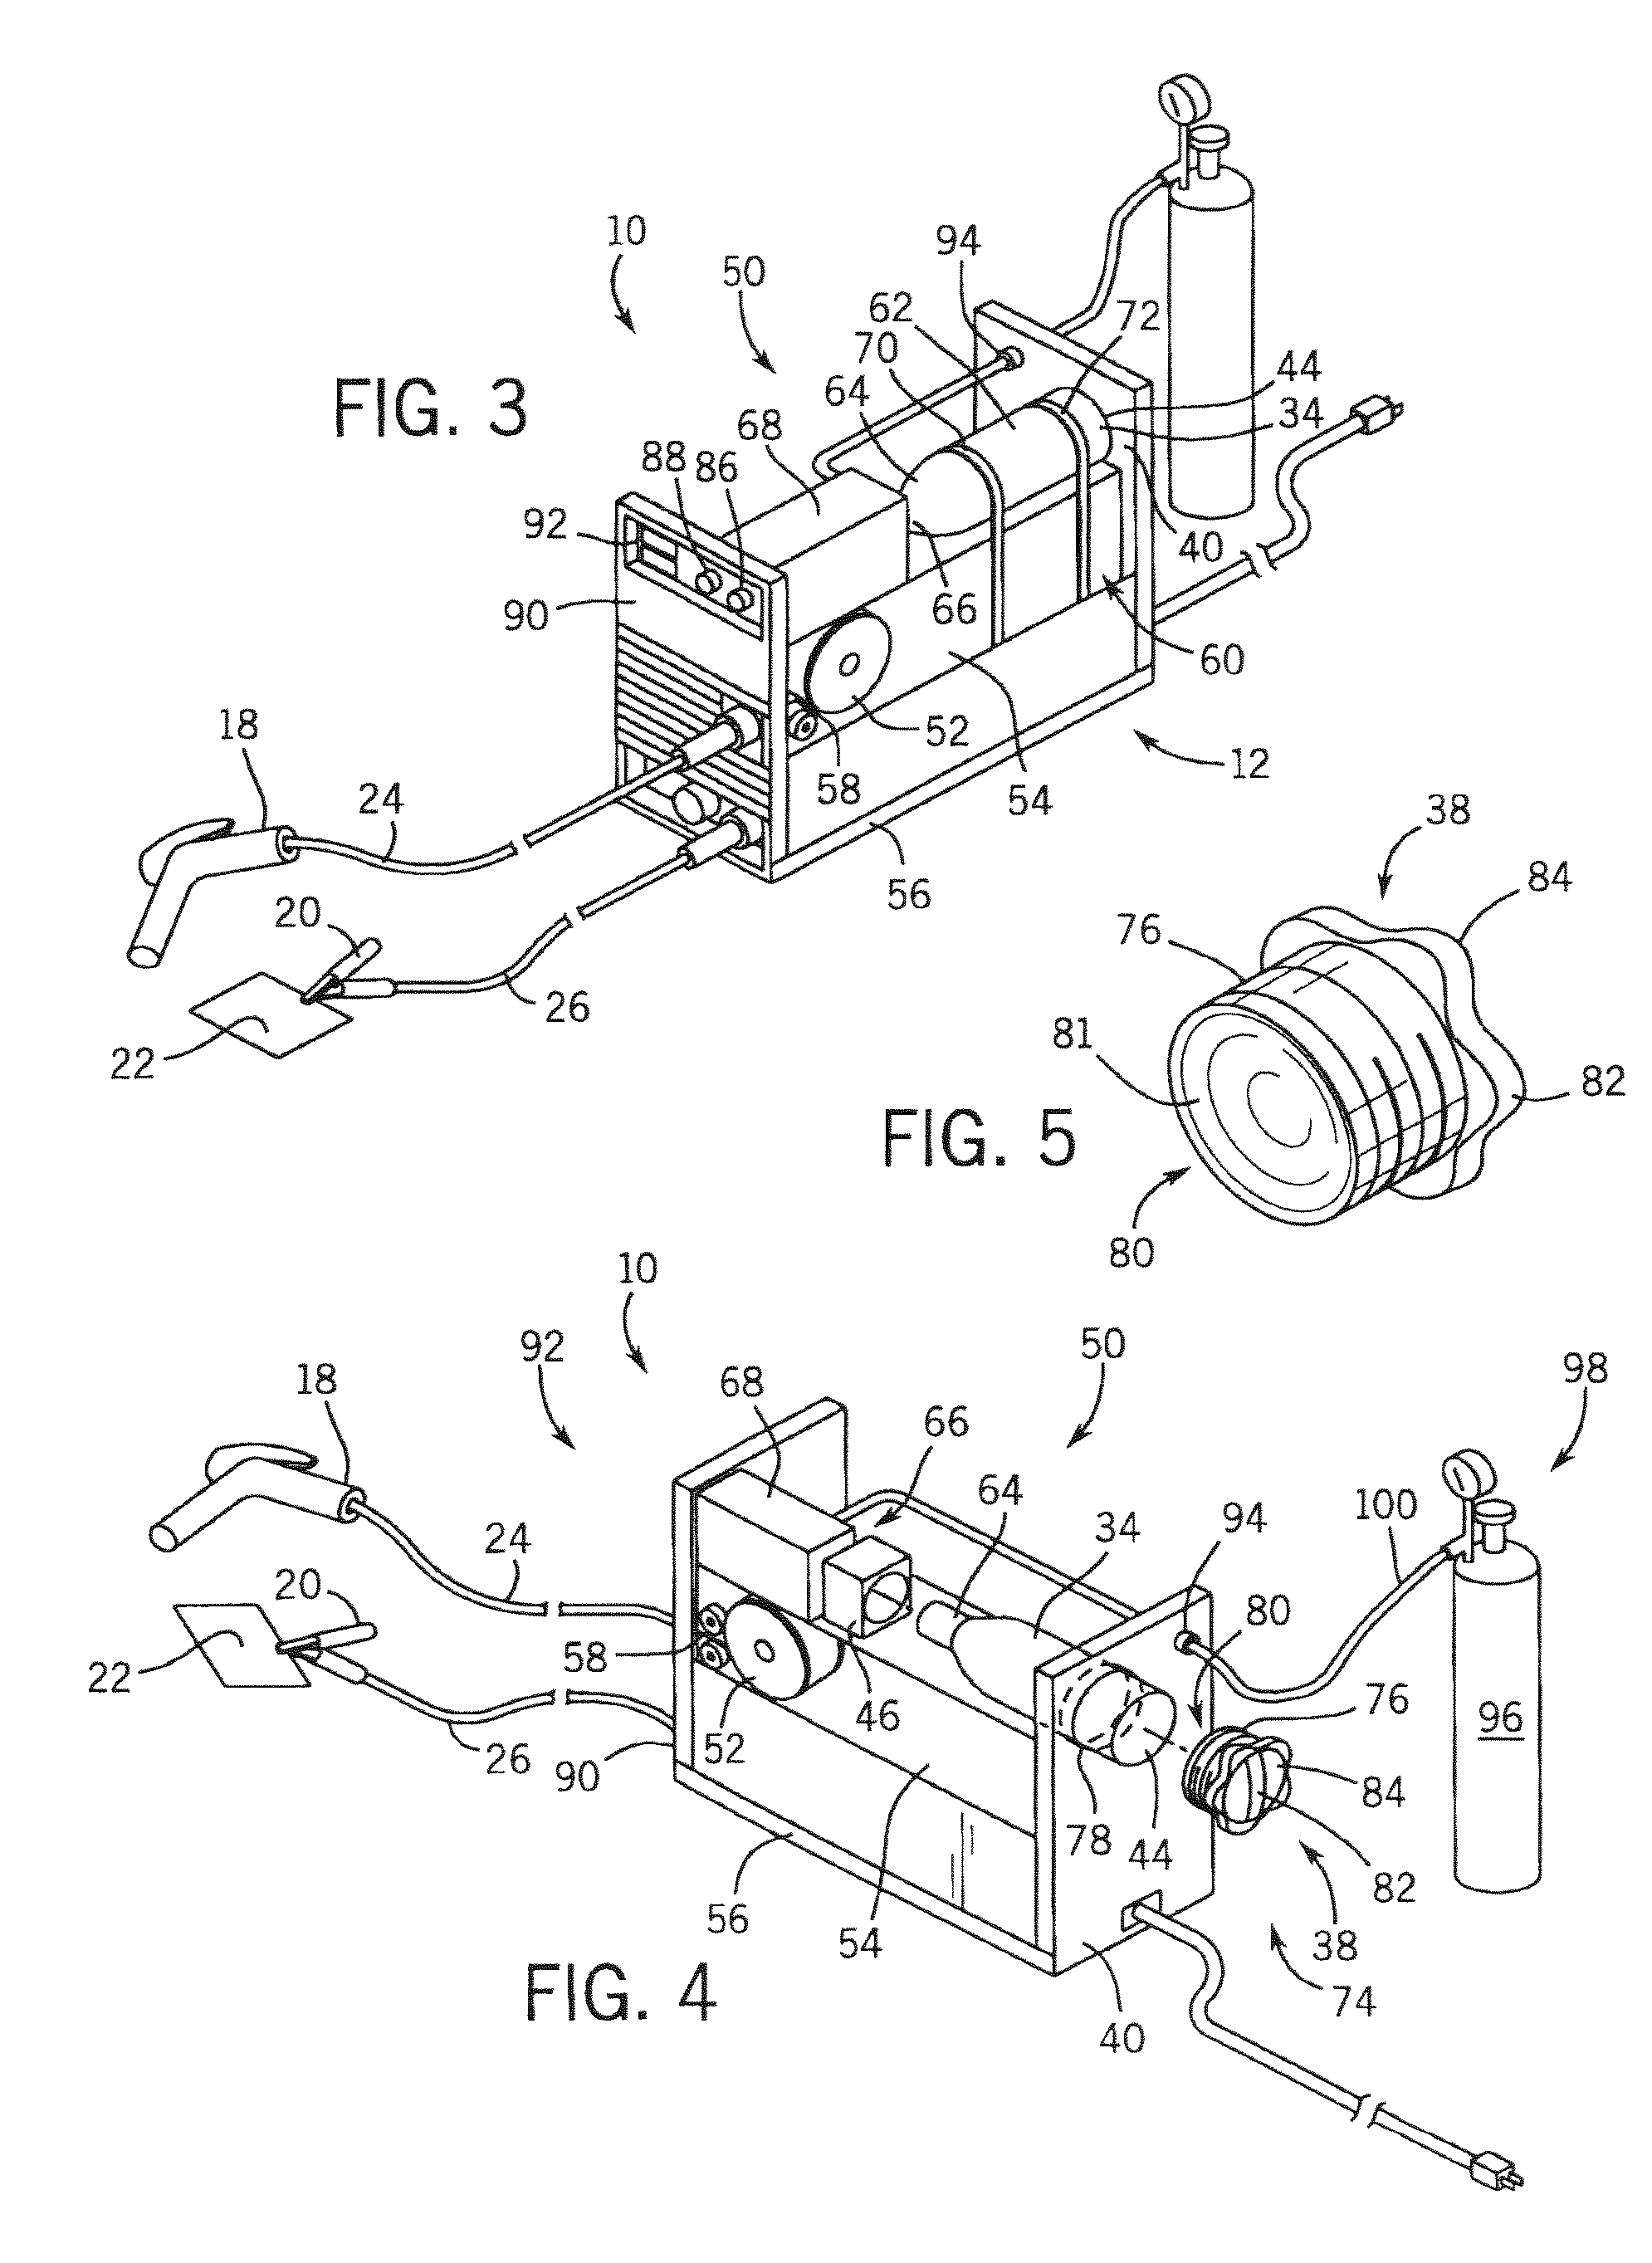 Welder with integrated gas bottle